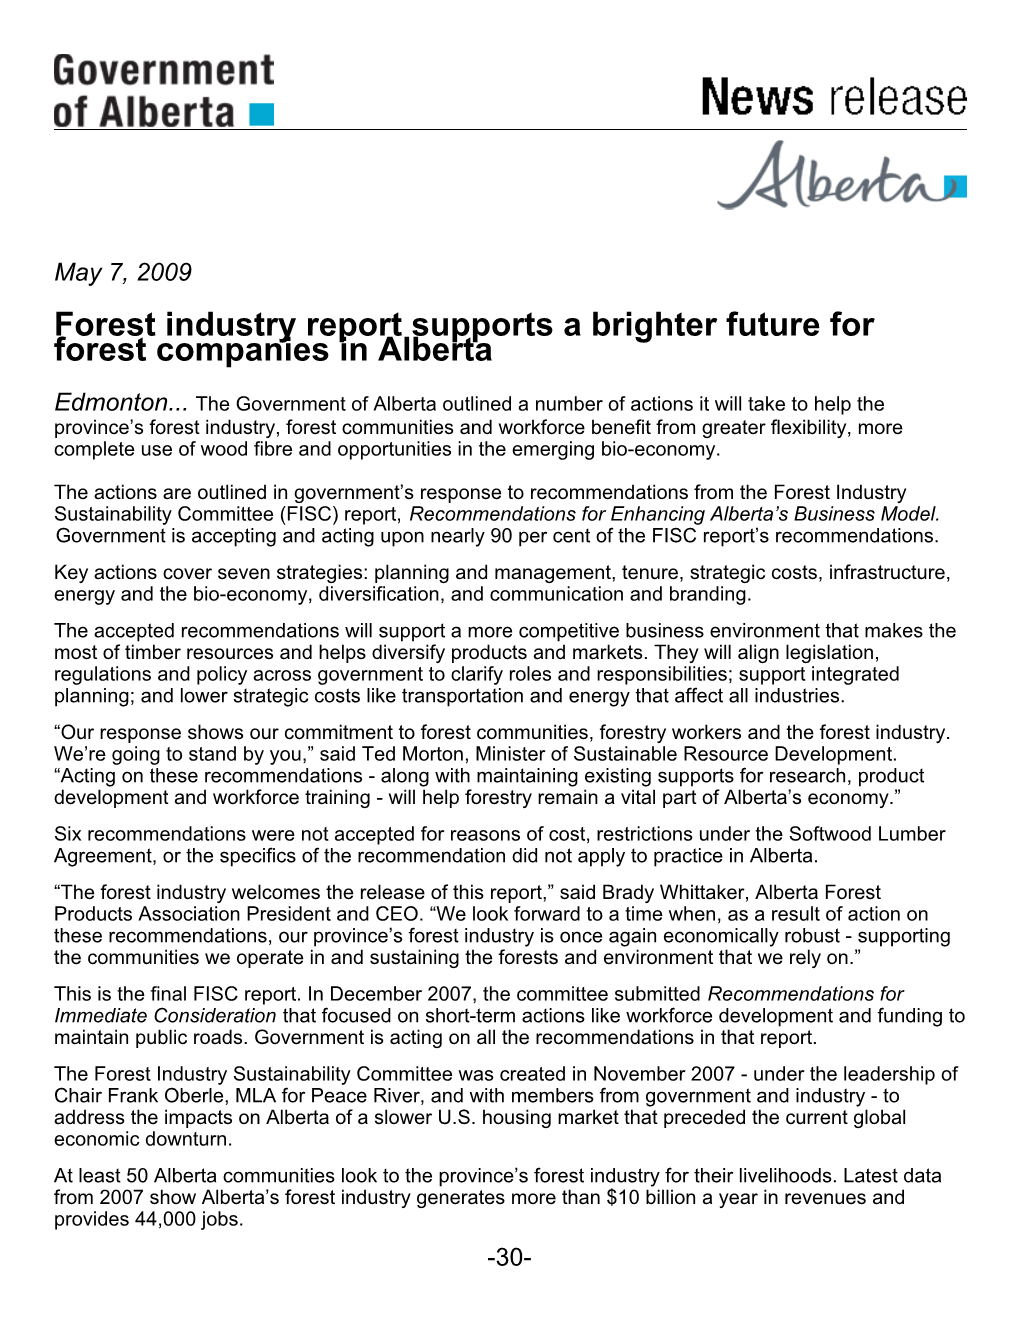 Forest Industry Report Supports a Brighter Future for Forest Companies in Alberta